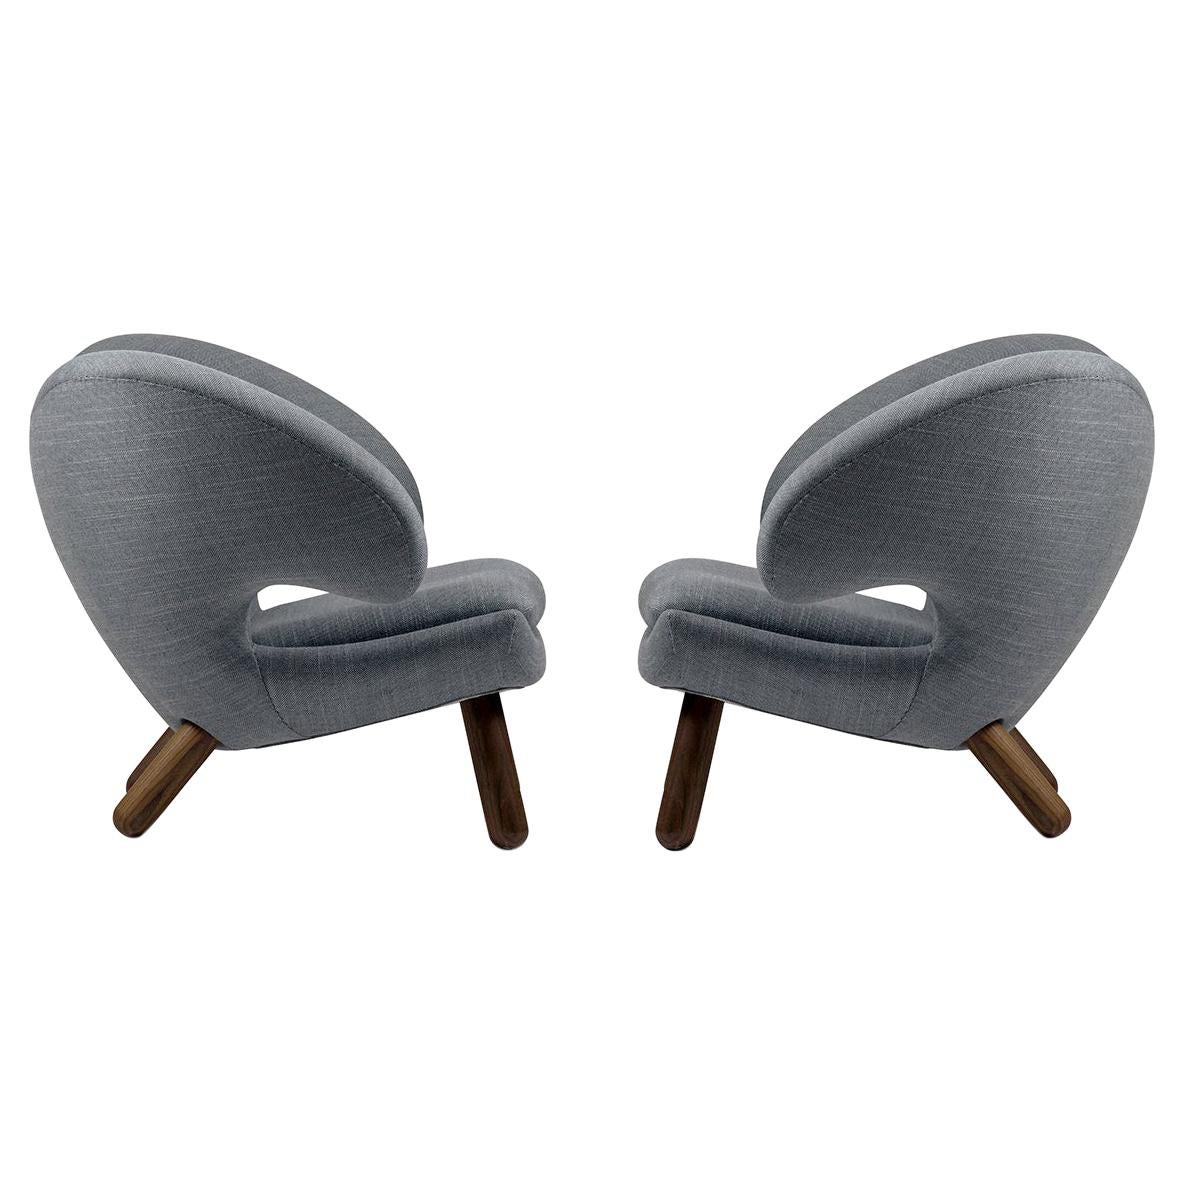 Set of Two Pelican Chairs by Finn Juhl in Fabric and Wood